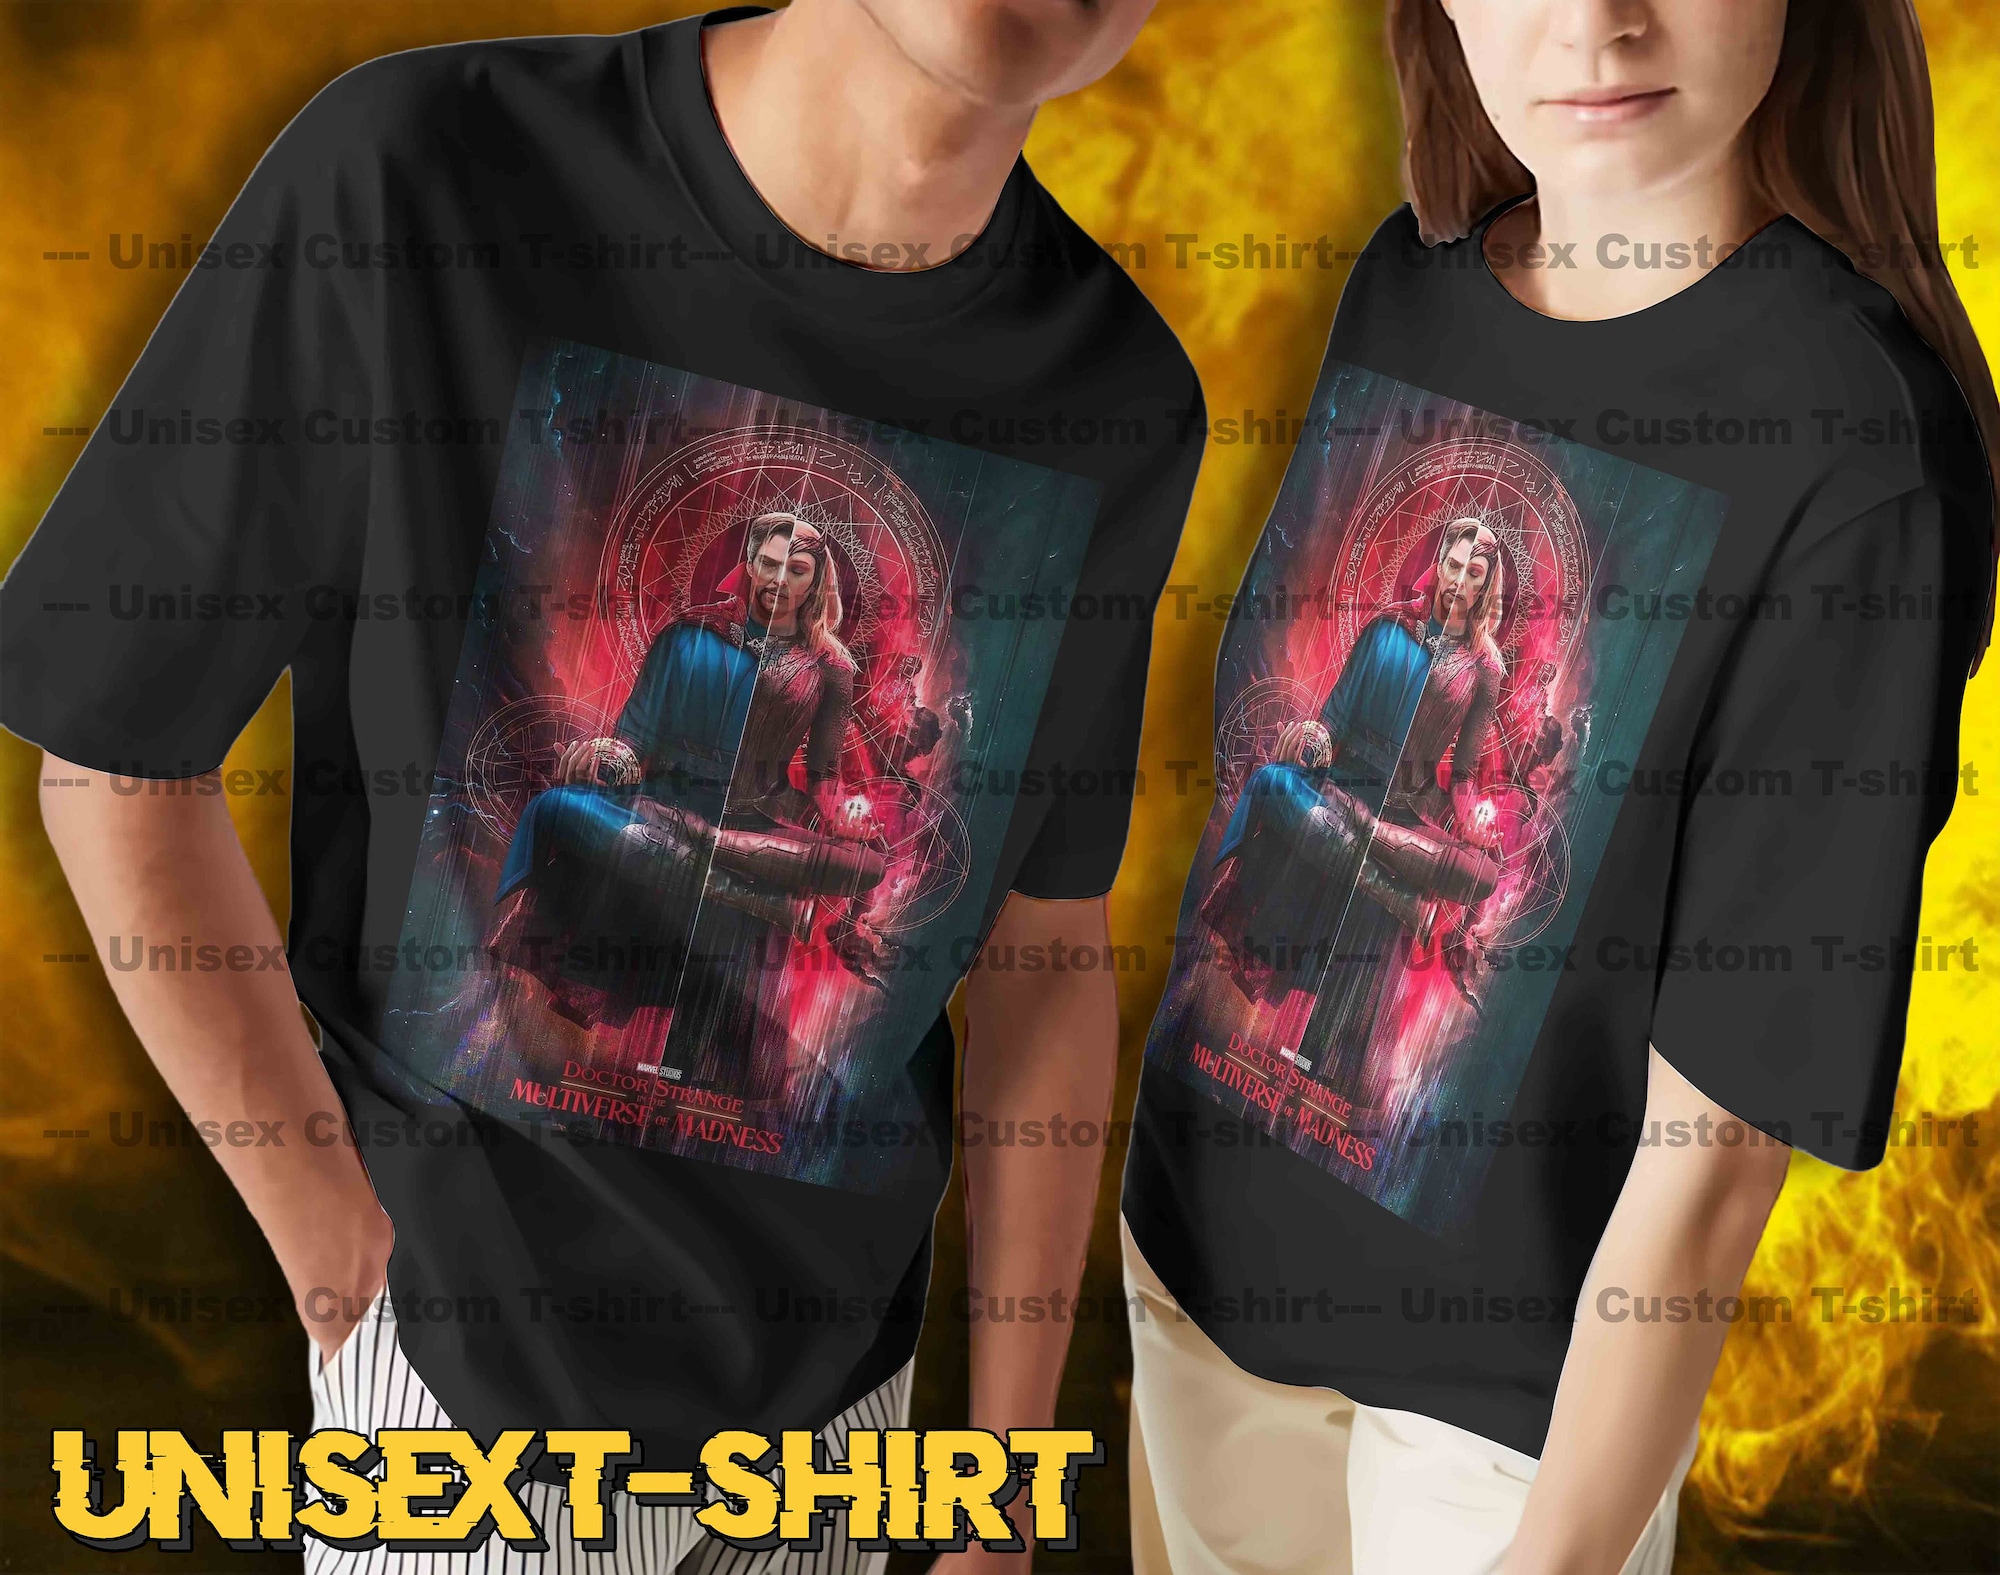 Discover New release multiverse of madness shirt doctor strange